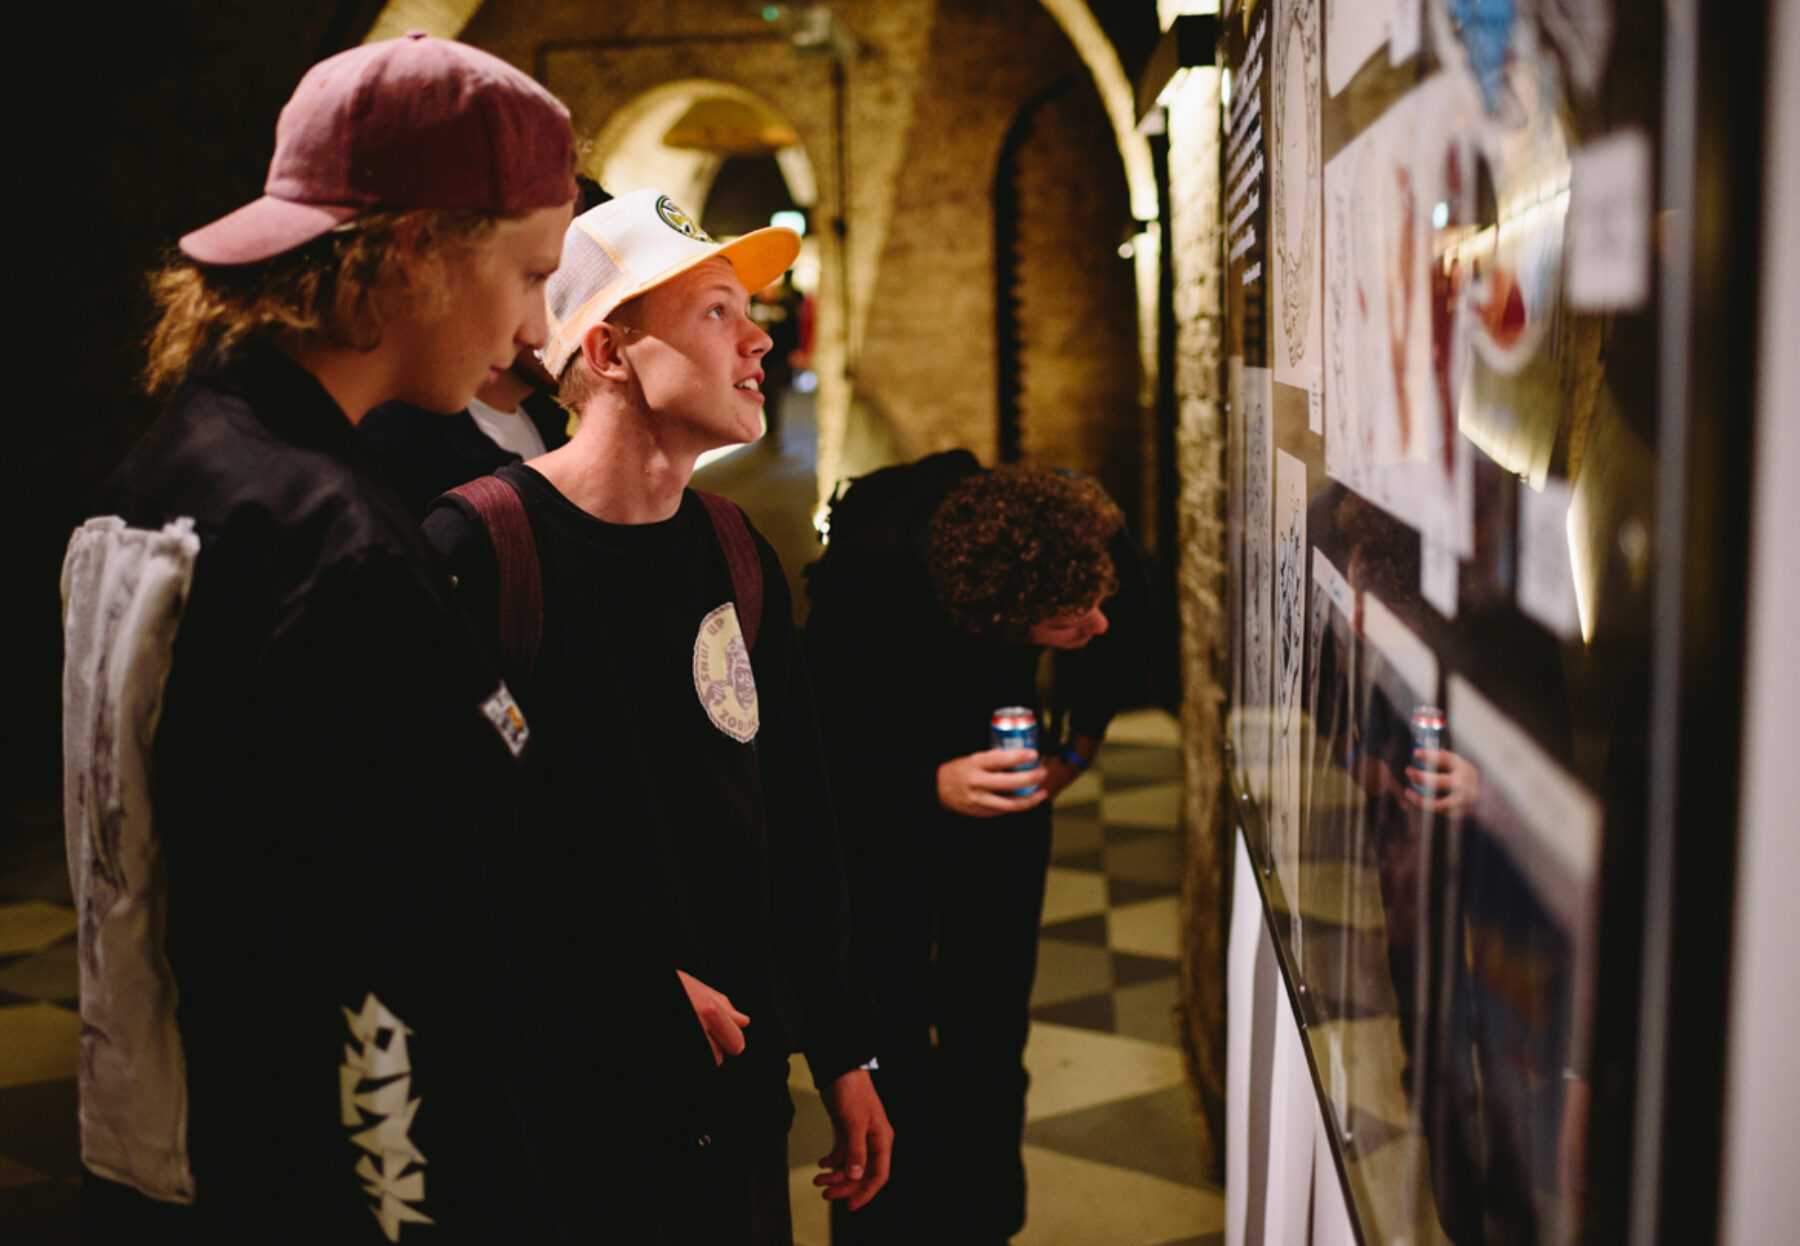 _IHC5542e-Thirty-Years-Of-Screaming-Hand-Exhibition-House-Of-Vans-London-August-2015-Photographer-Maksim-Kalanep